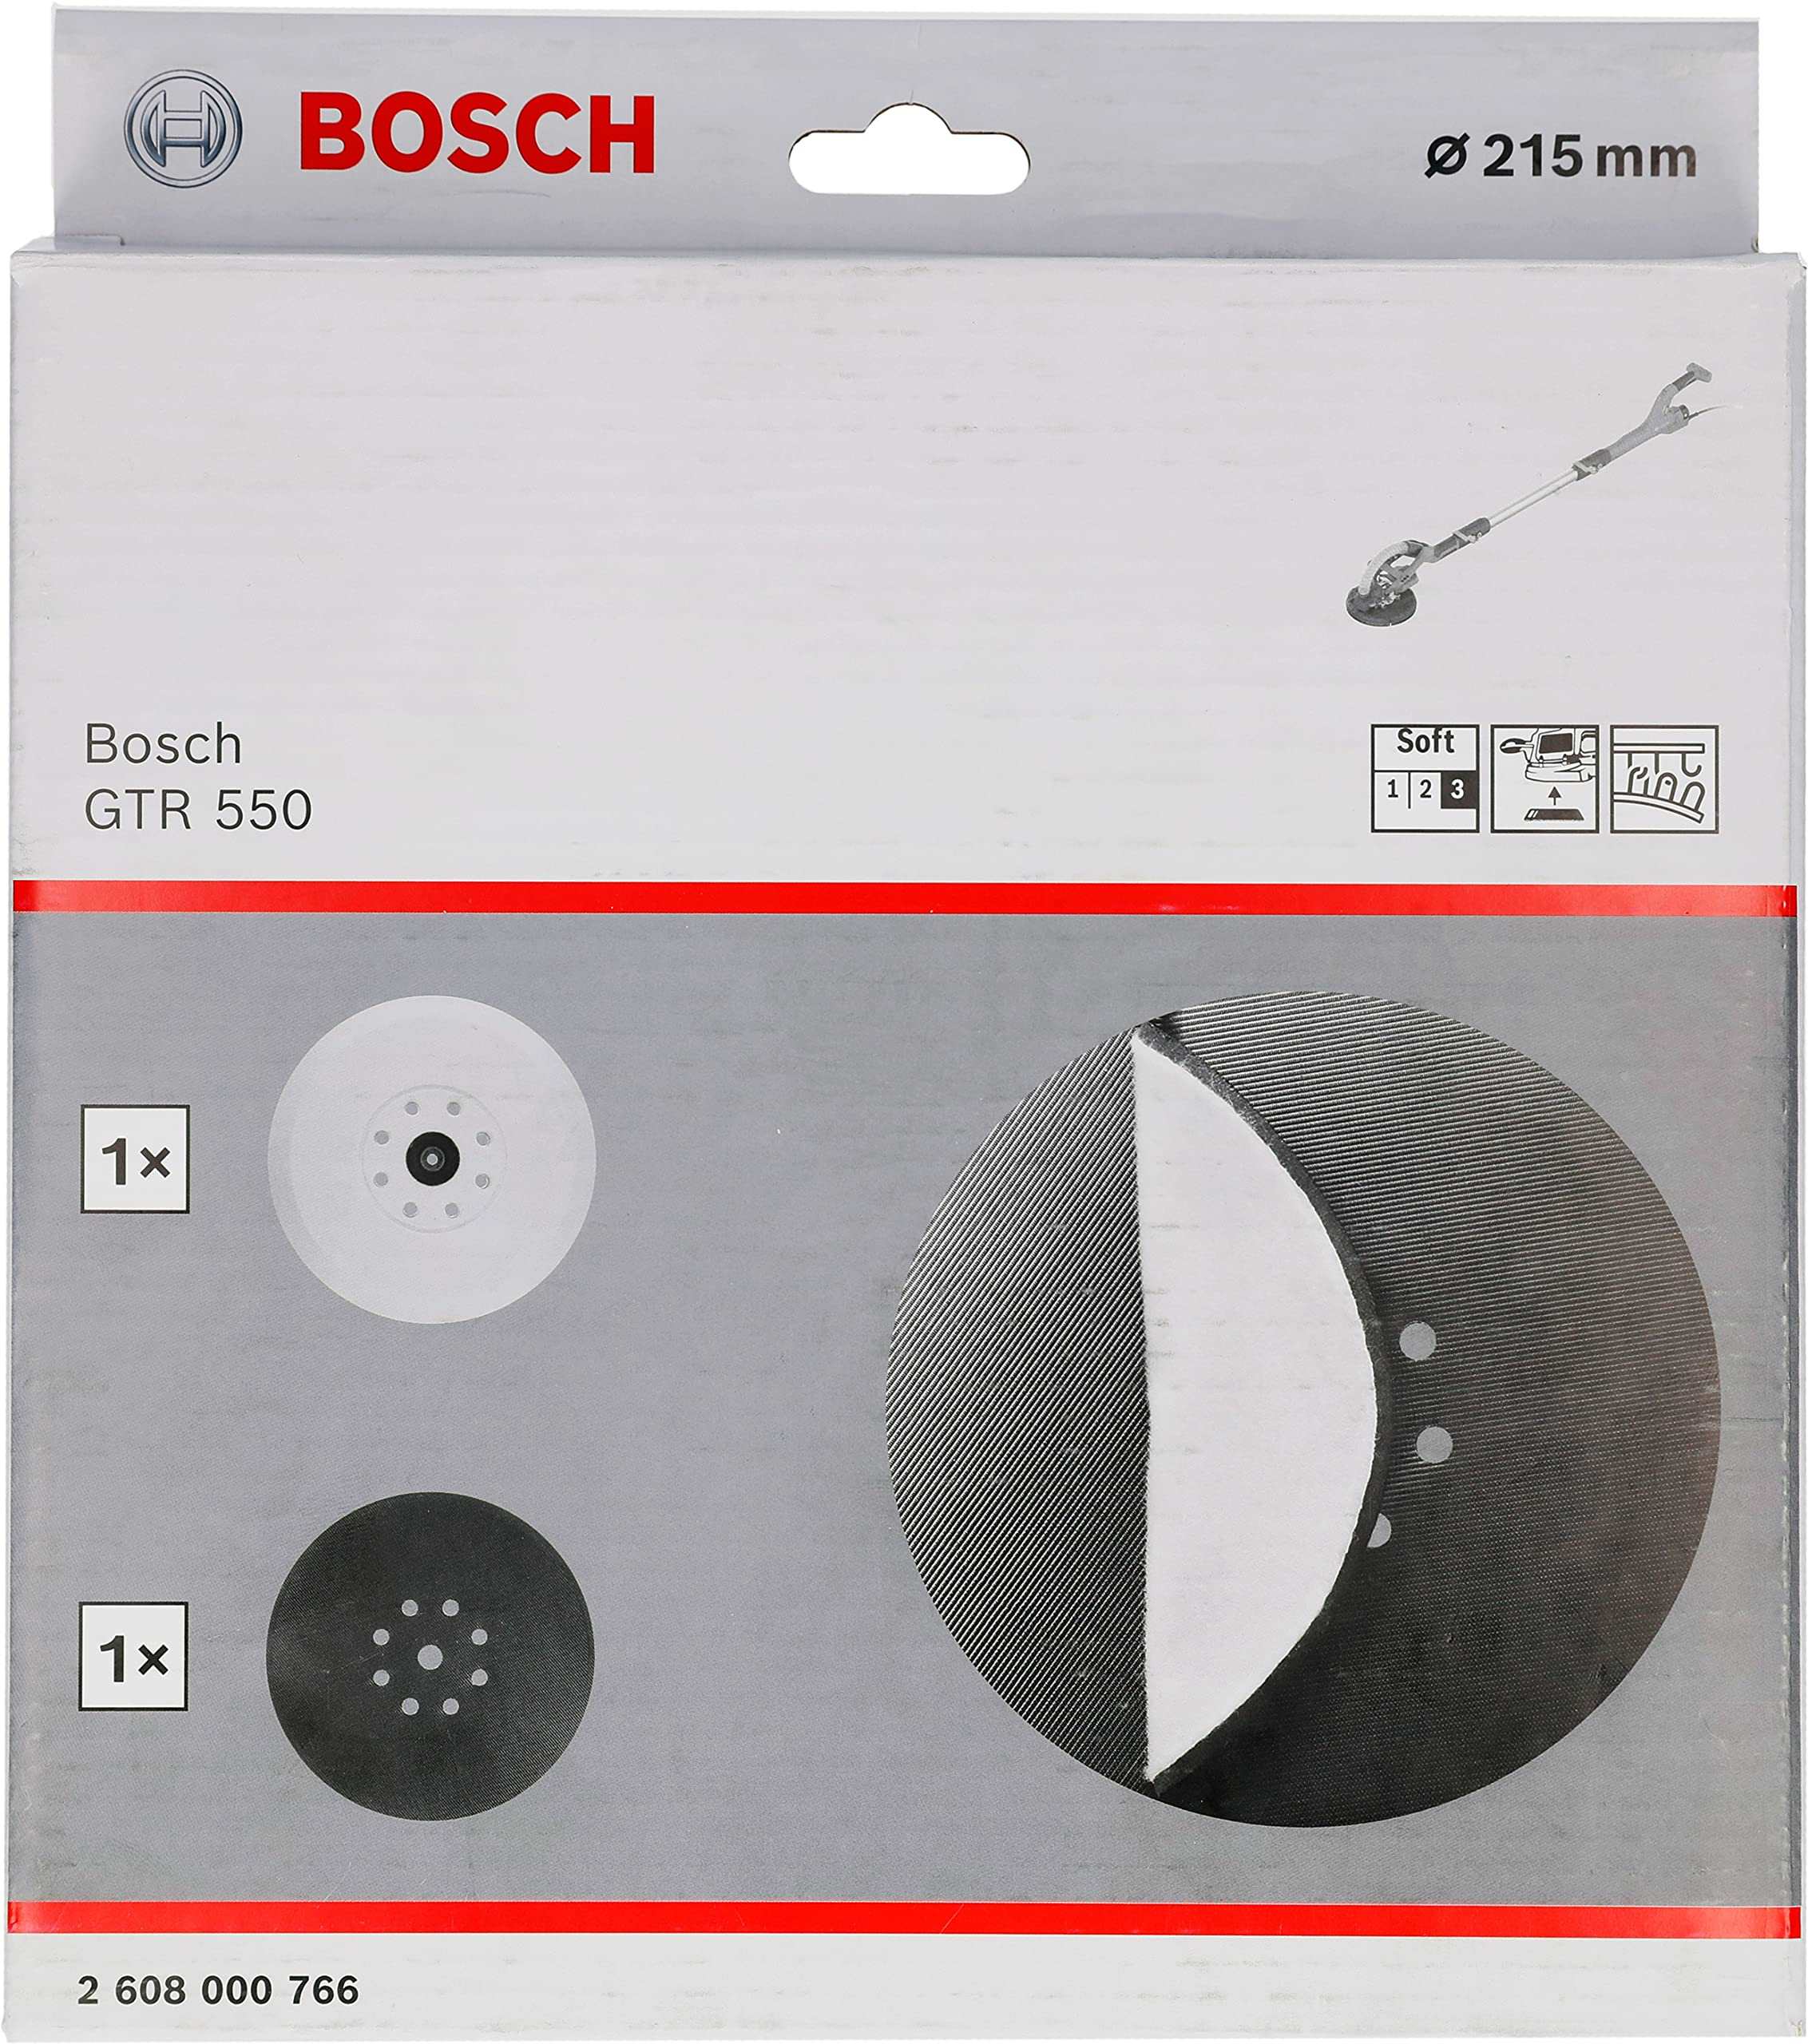 Bosch Backing Pad 225mm, soft 2608000766 Power Tool Services